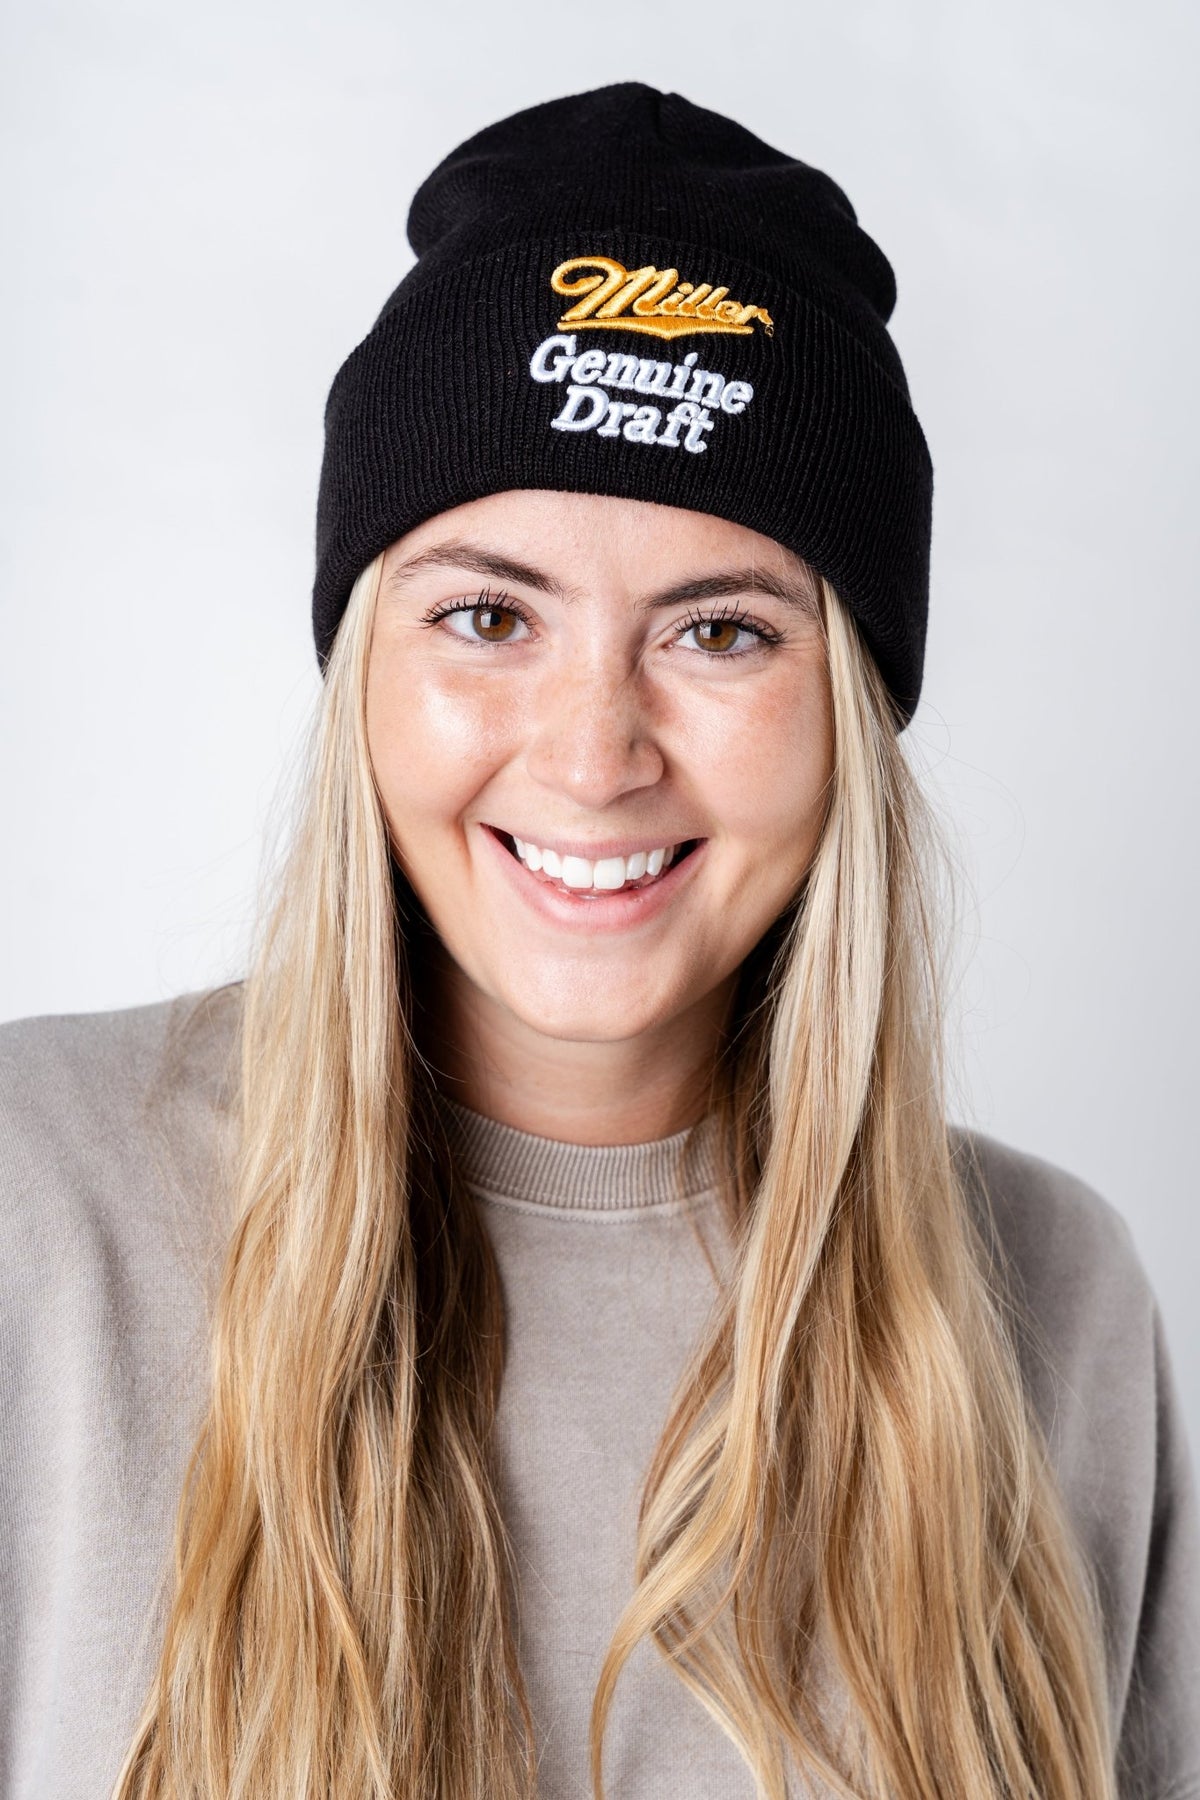 Miller genuine draft cuffed knit beanie black - Trendy Gifts at Lush Fashion Lounge Boutique in Oklahoma City